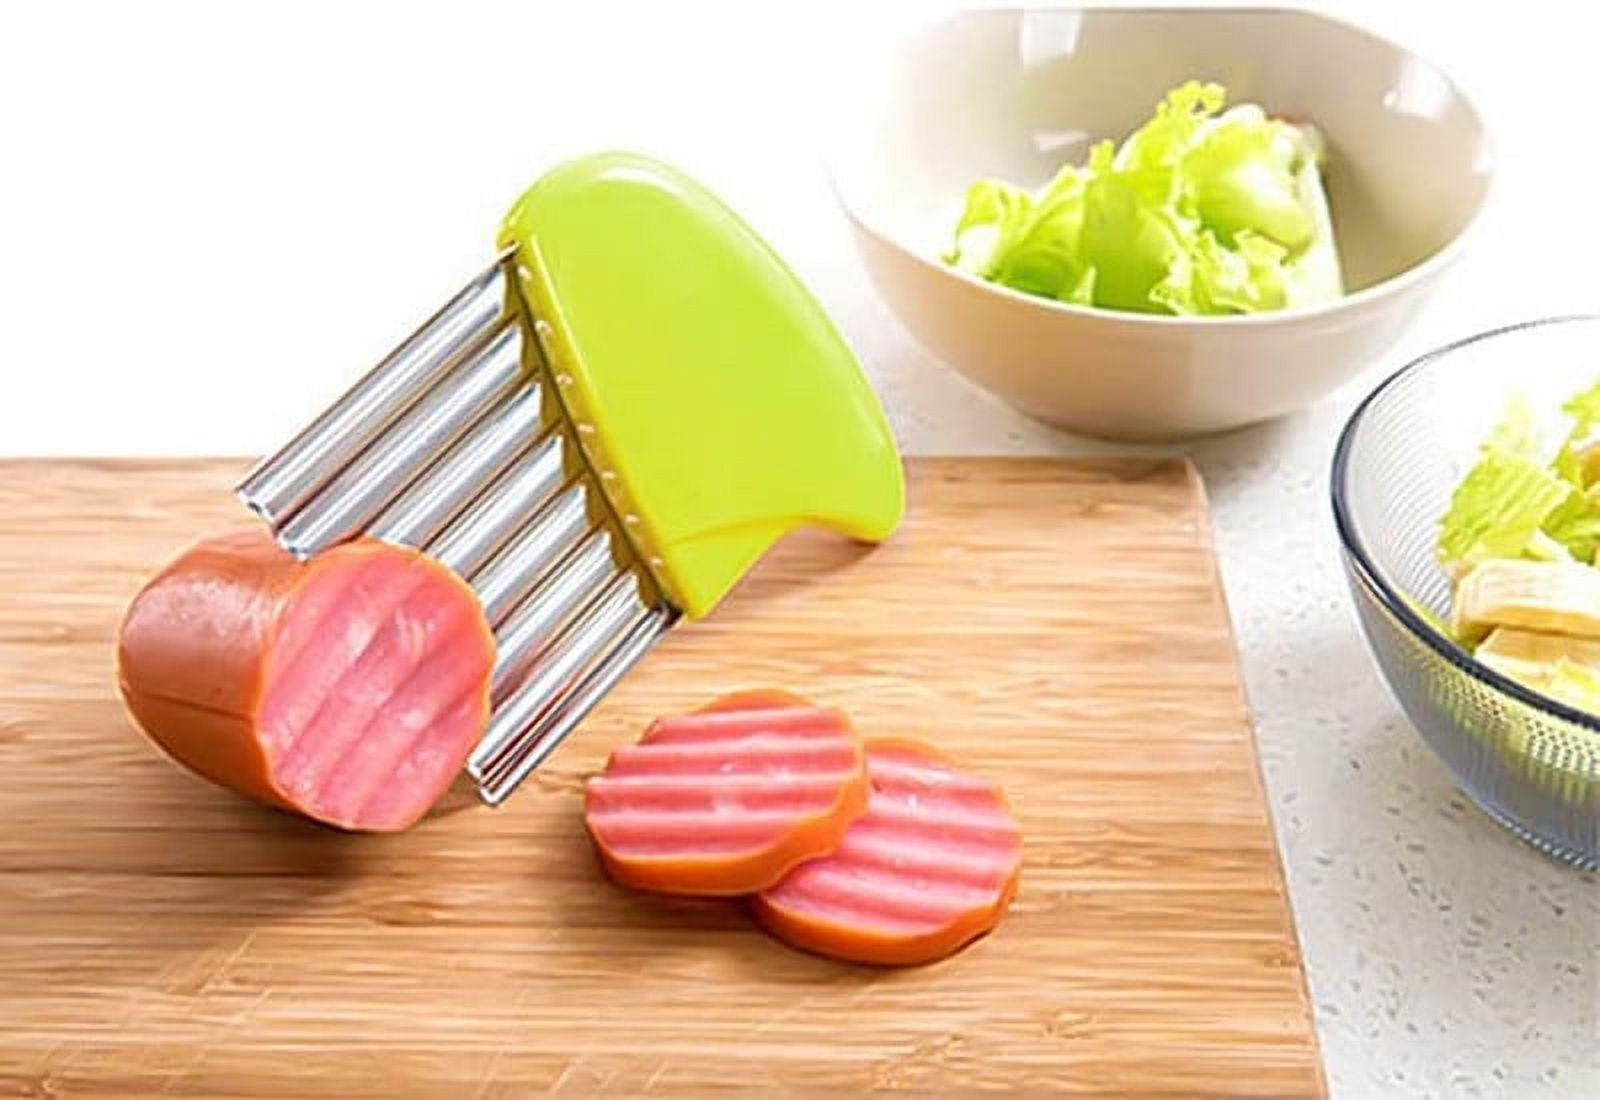 Casewin Crinkle Cut knife, Stainless Steel Crinkle Cutting Tool Fruit and  Vegetable Wavy Chopper Knife Wave Slicer 